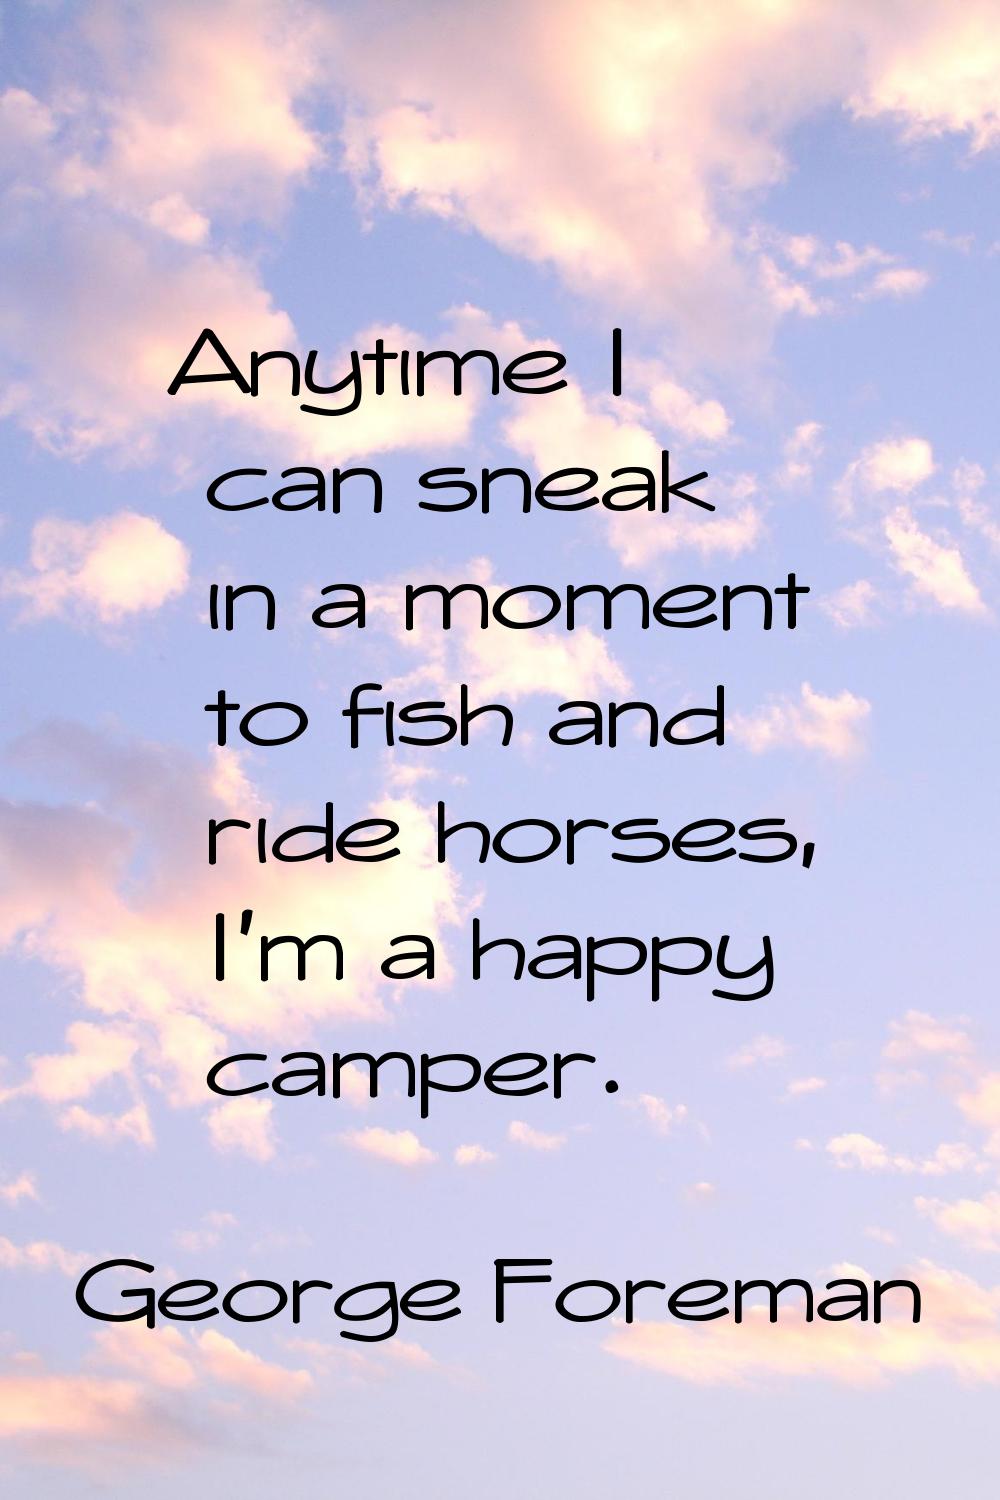 Anytime I can sneak in a moment to fish and ride horses, I'm a happy camper.